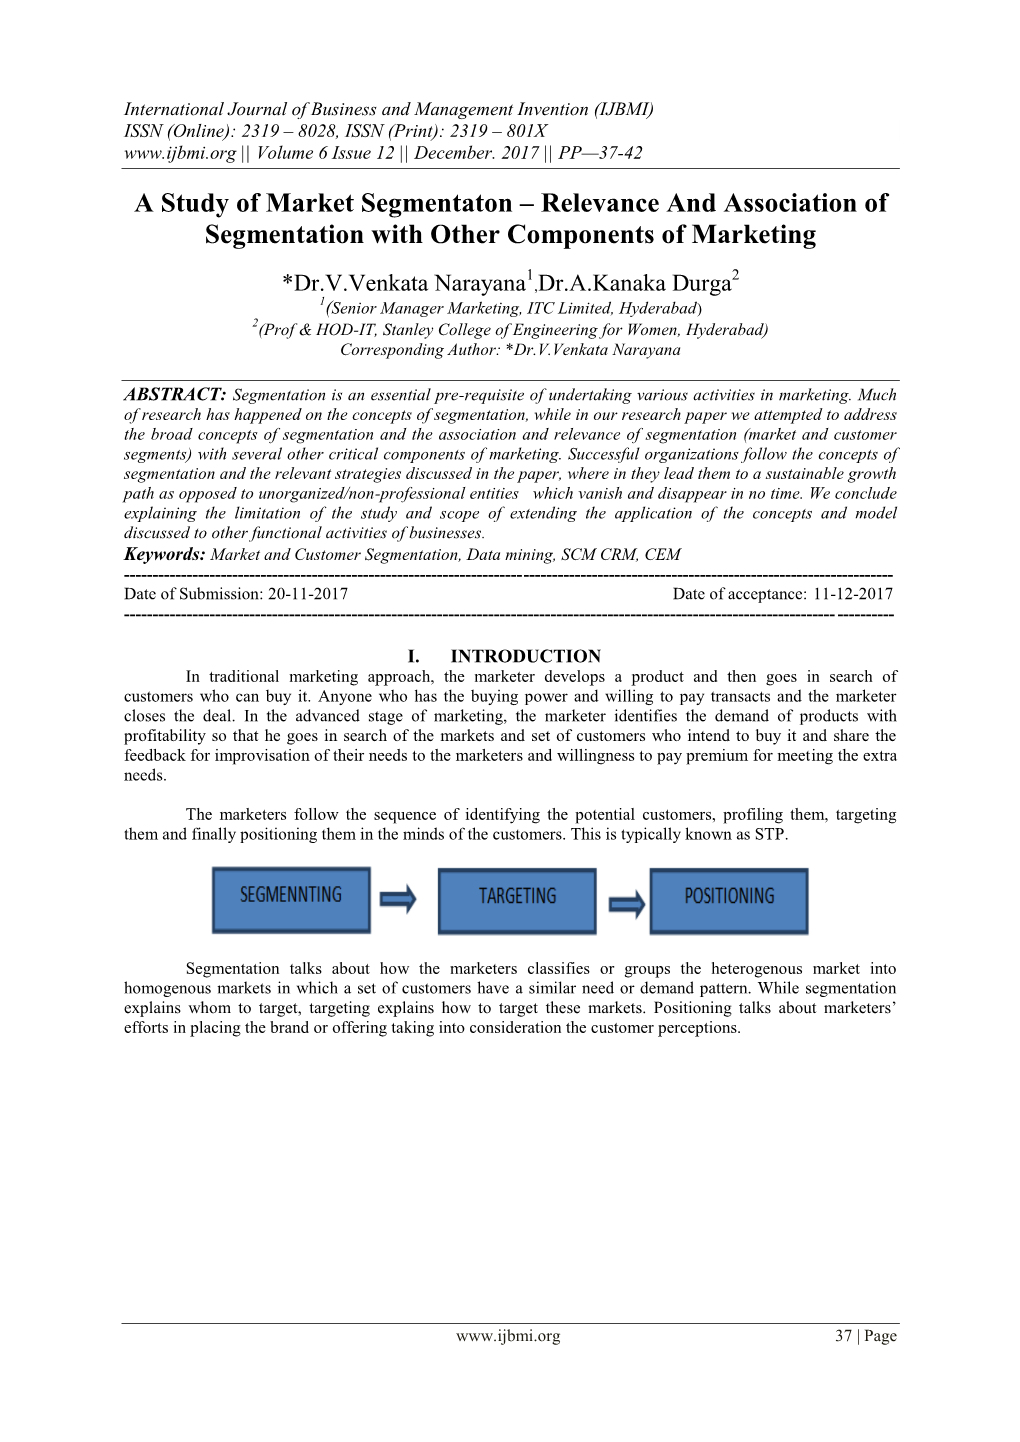 A Study of Market Segmentaton – Relevance and Association of Segmentation with Other Components of Marketing